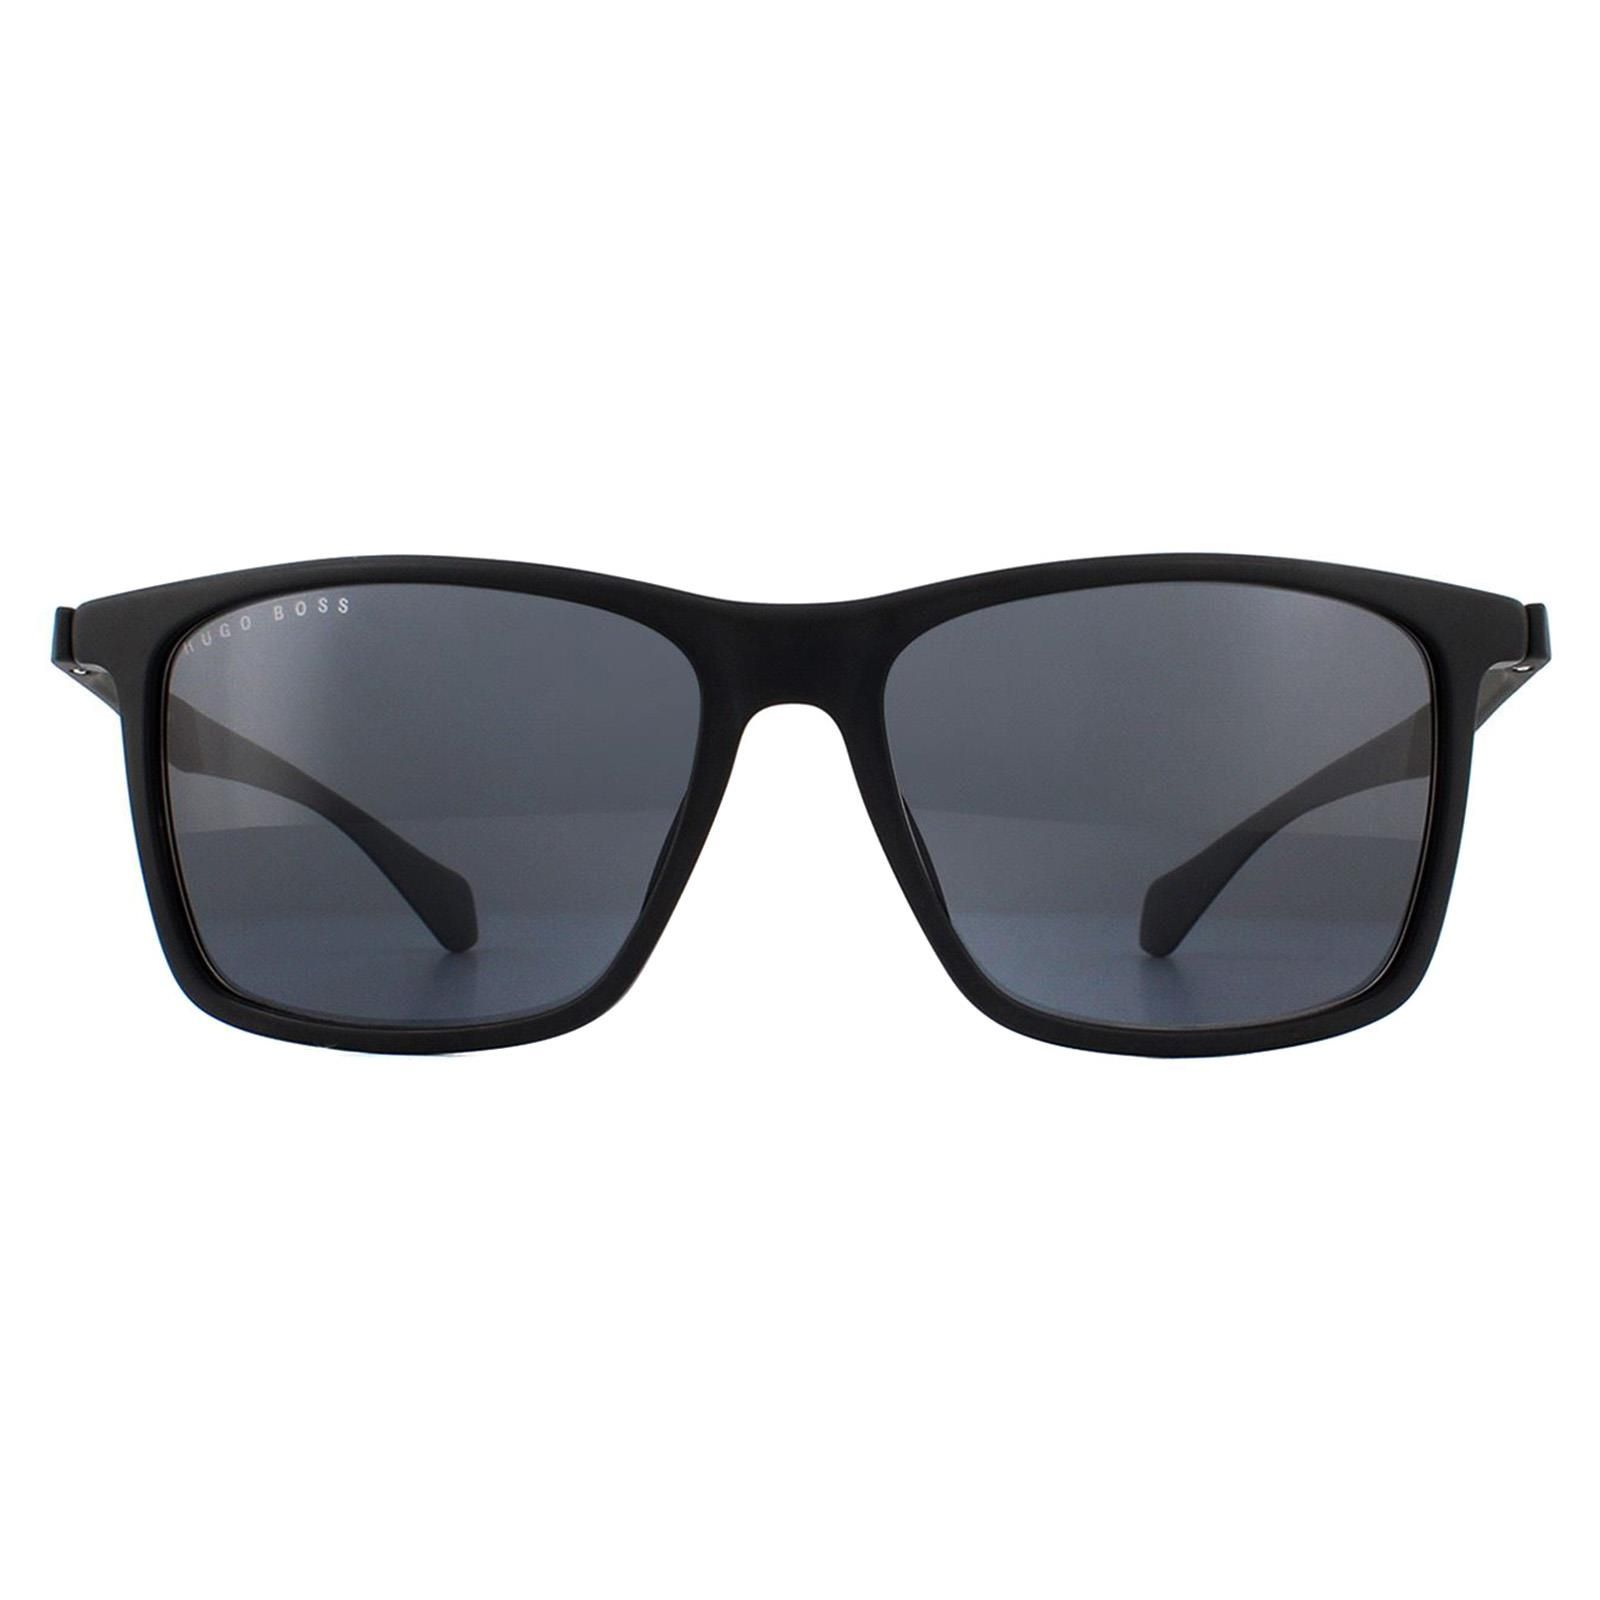 Hugo Boss Sunglasses BOSS 1078/S 003 IR Matte Black Grey are a sleek rectangular style for men. Made from lightweight acetate, the frame is very comfortable to wear and features the Hugo Boss logo on each temple.